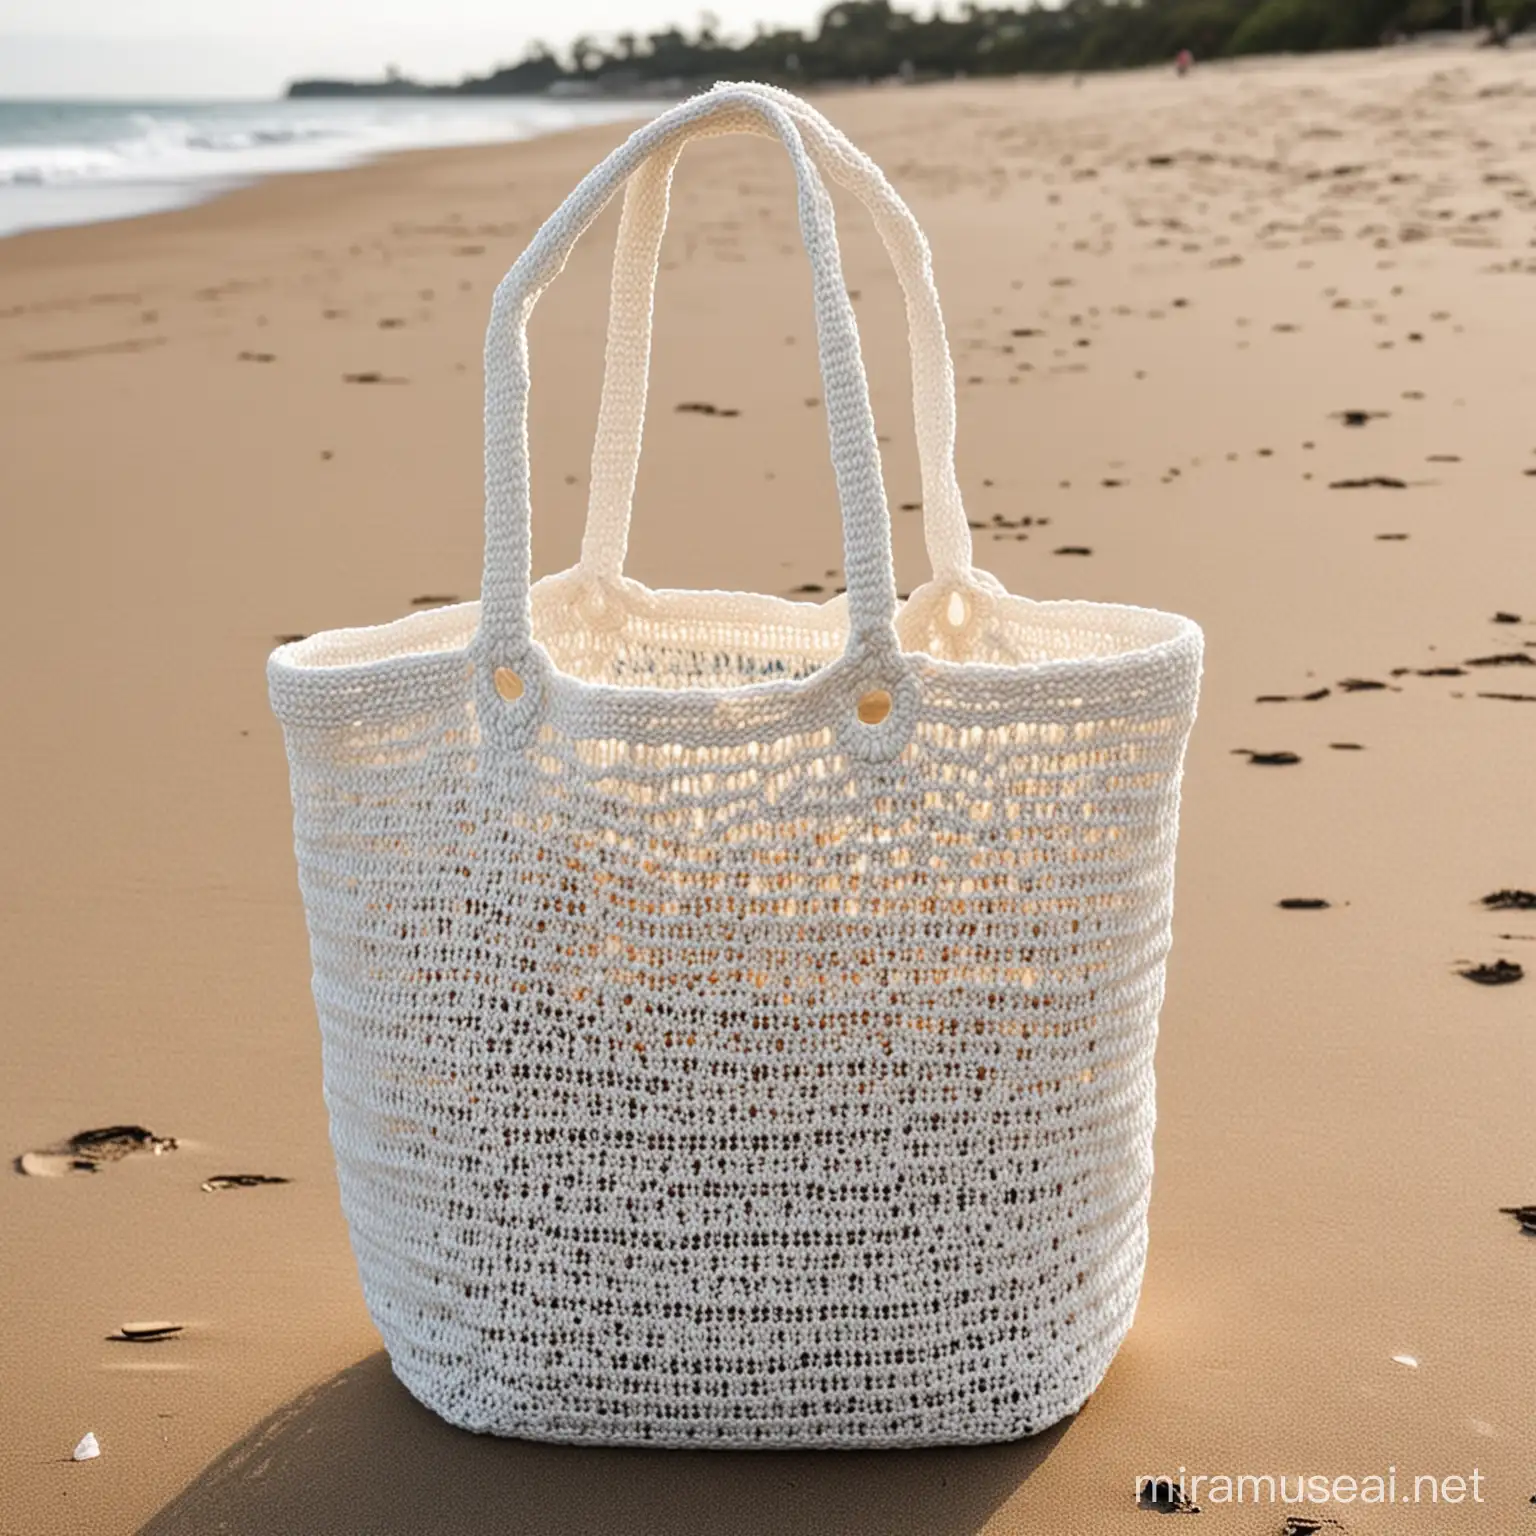 design a mockup for an empty reusable crochet grocery market bag used at the beach  